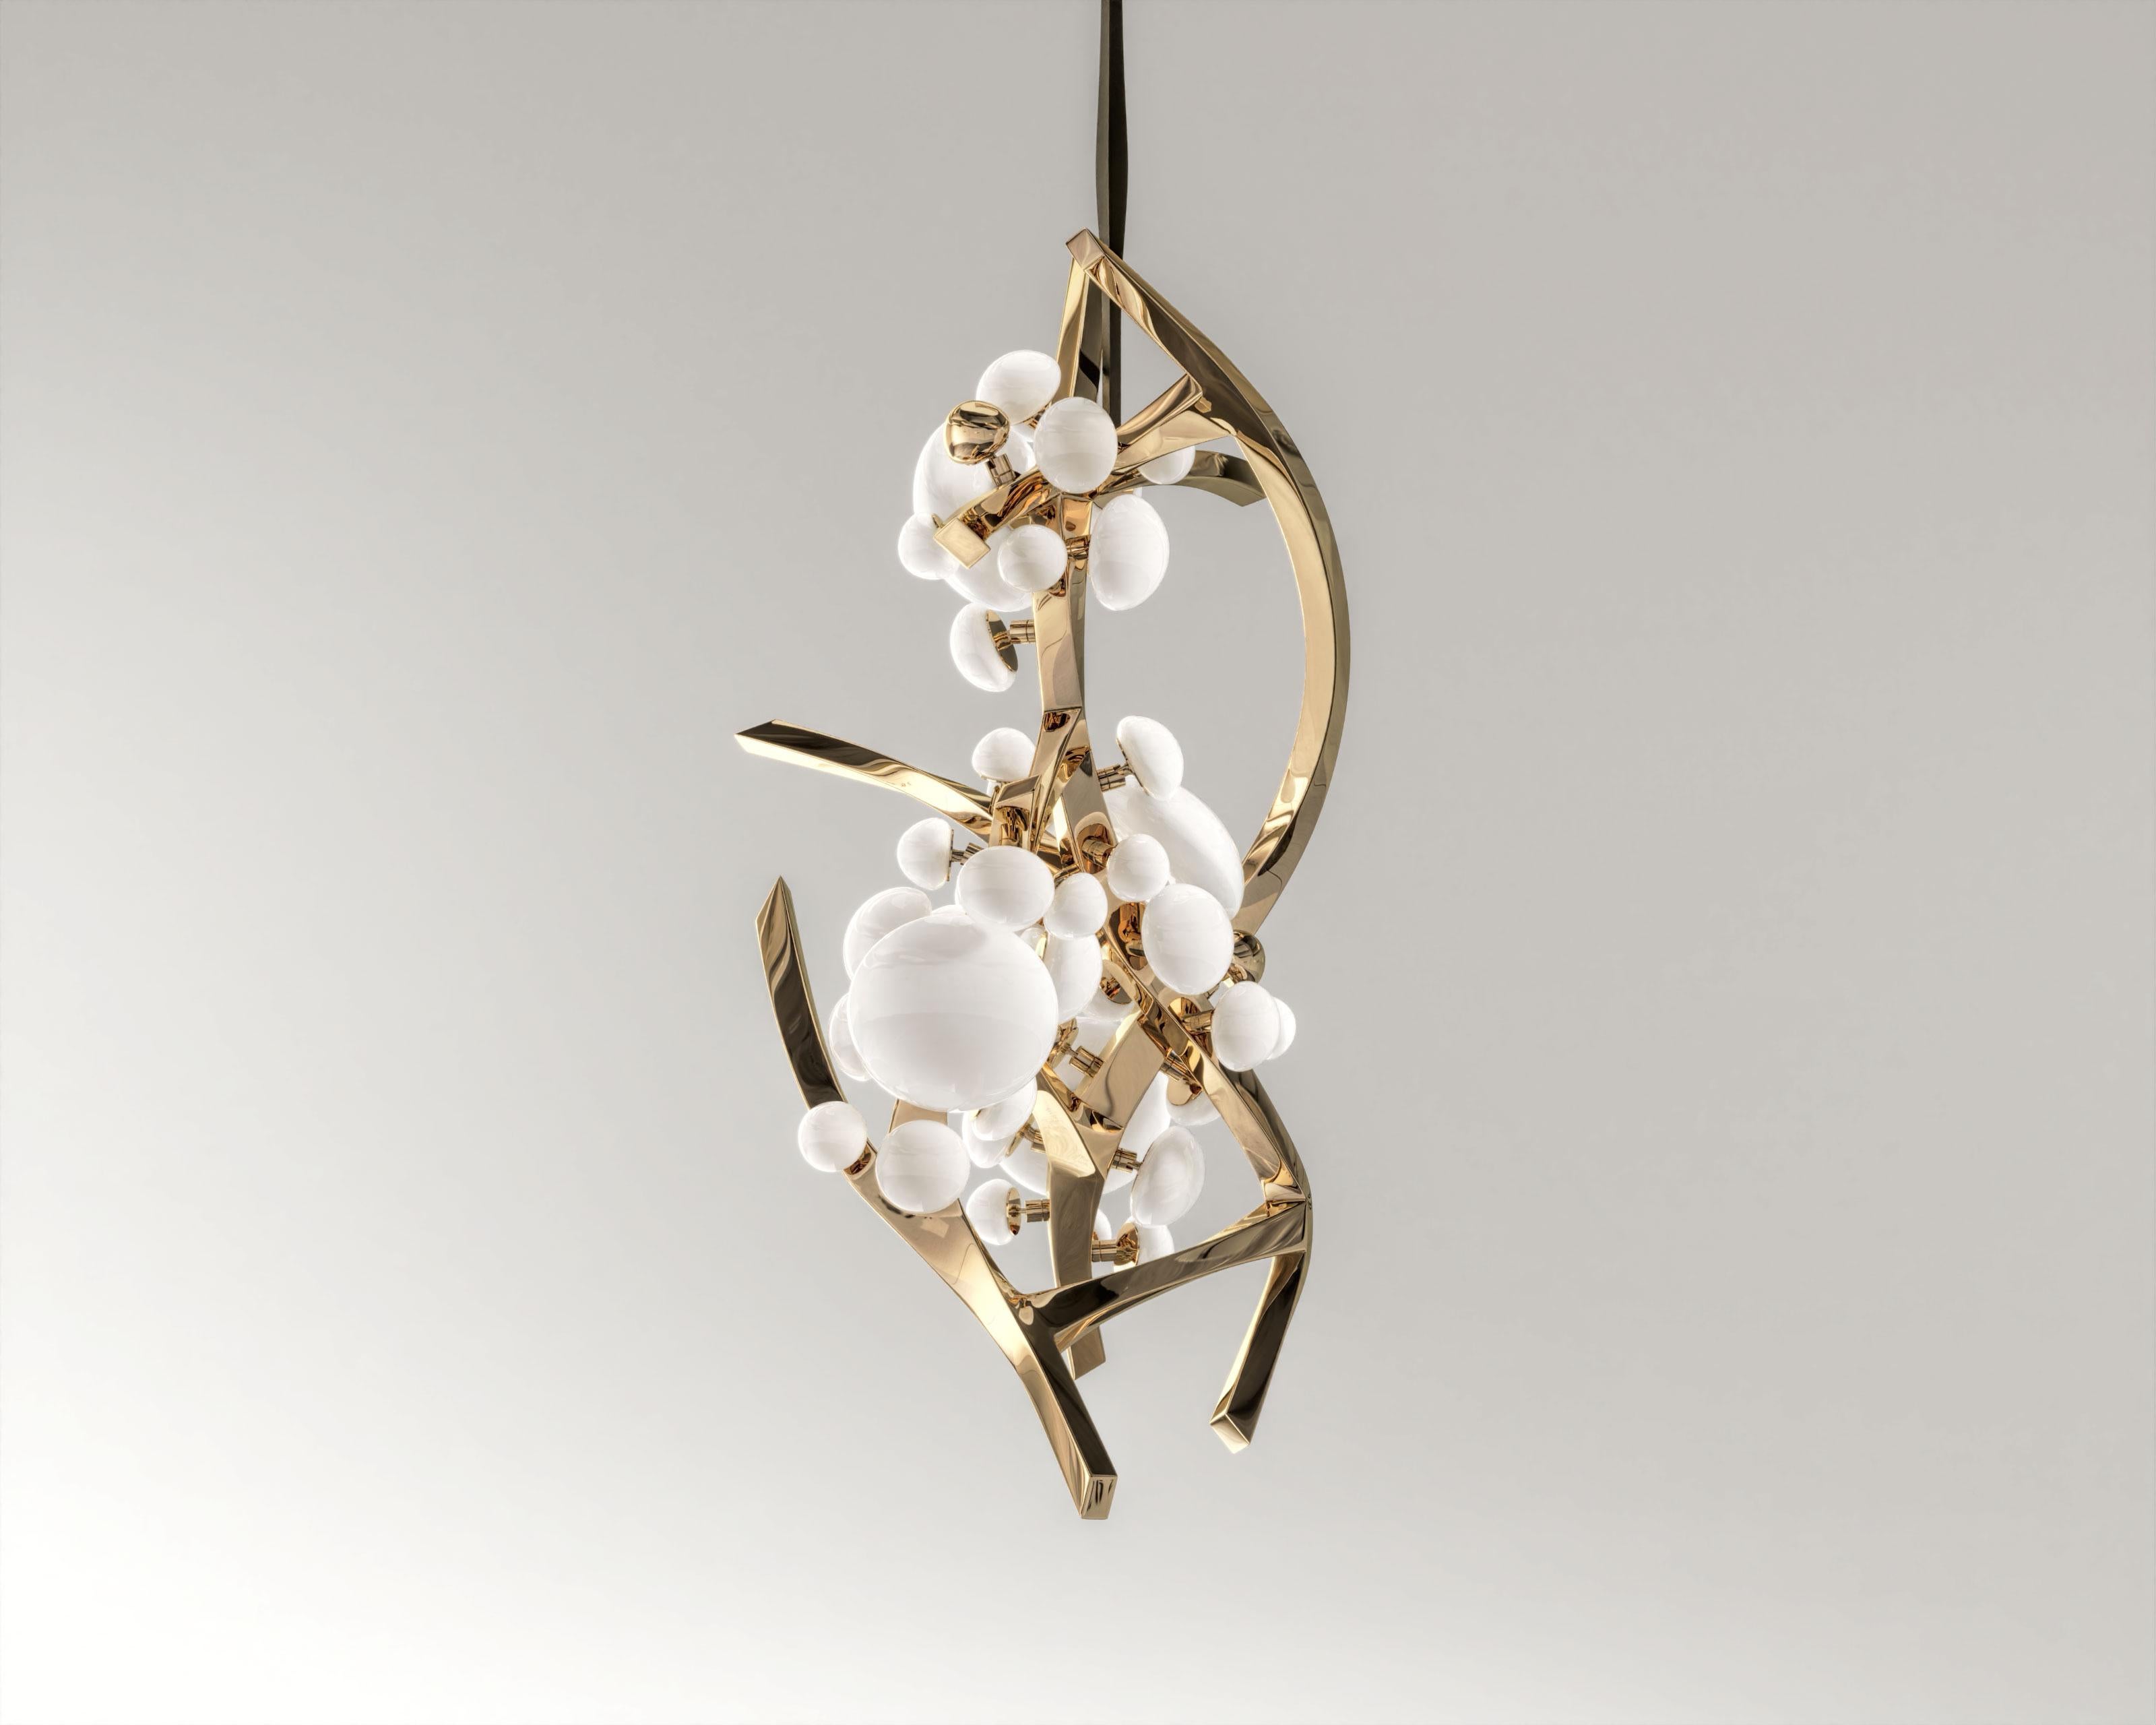 Intıma Vertical Polished Bronze Chandelier
The “Intima” Luxury Handmade Chandelier is an exquisite work of art that seamlessly merges the elegance of neural networks. This chandelier serves as the focal point of any space, exuding sophistication and